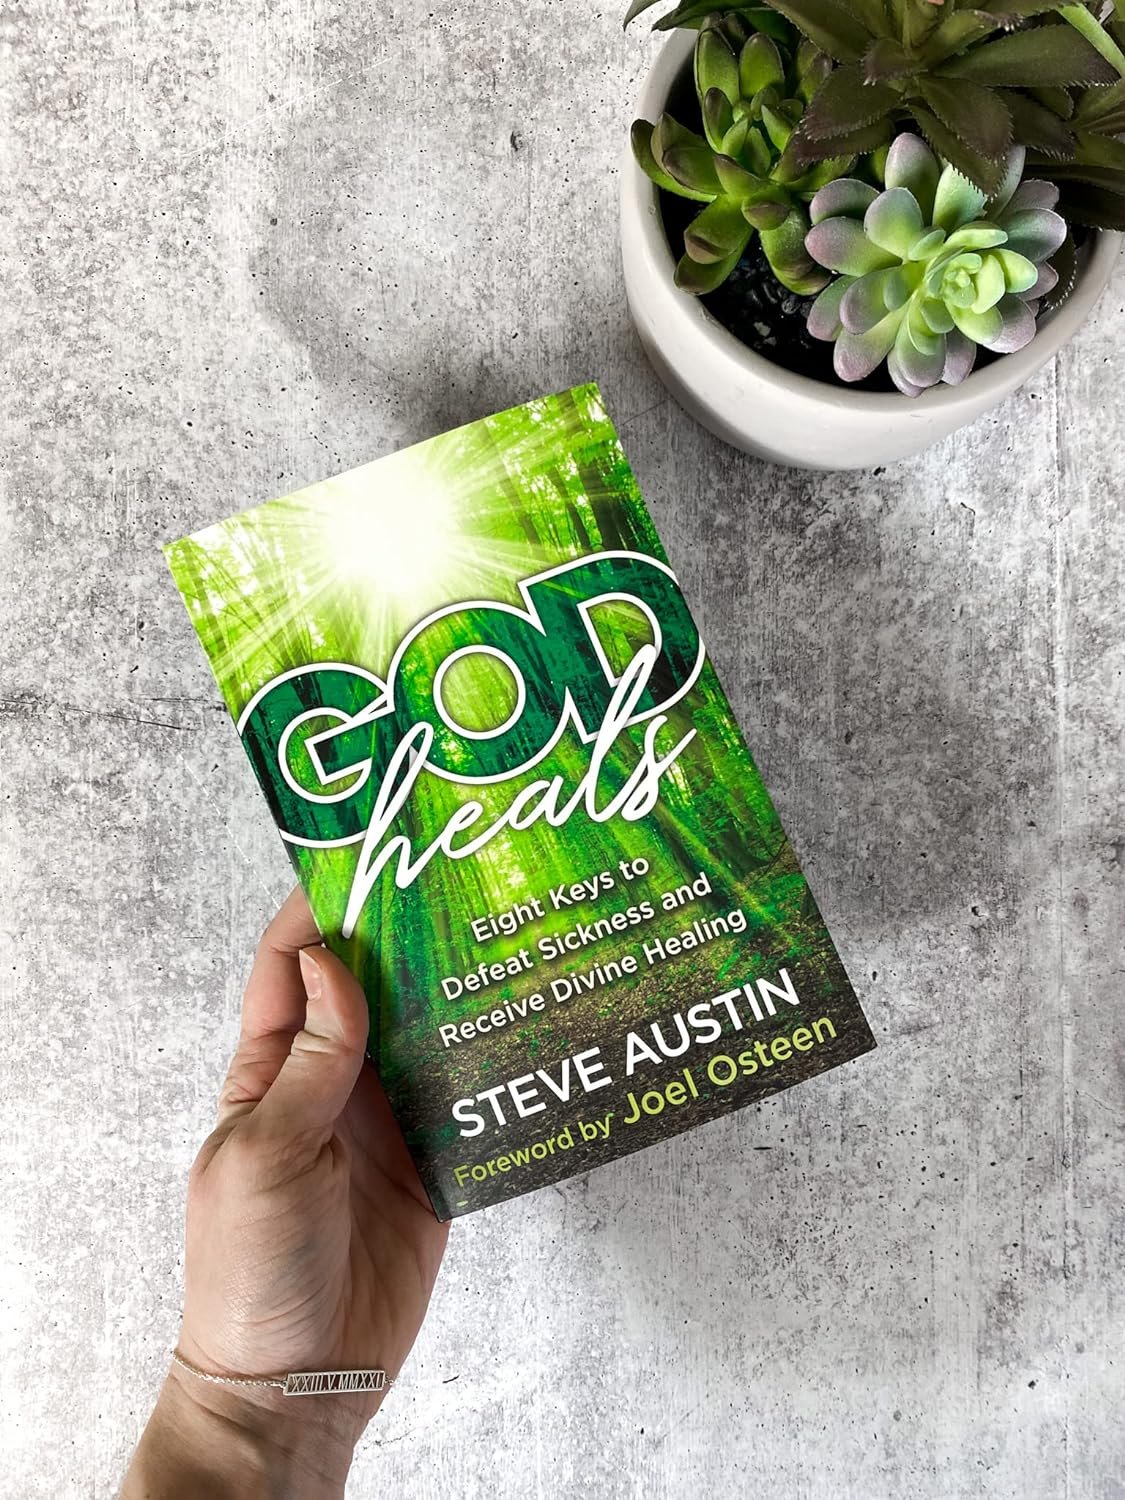 God Heals: Eight Keys to Defeat Sickness and Receive Divine Healing